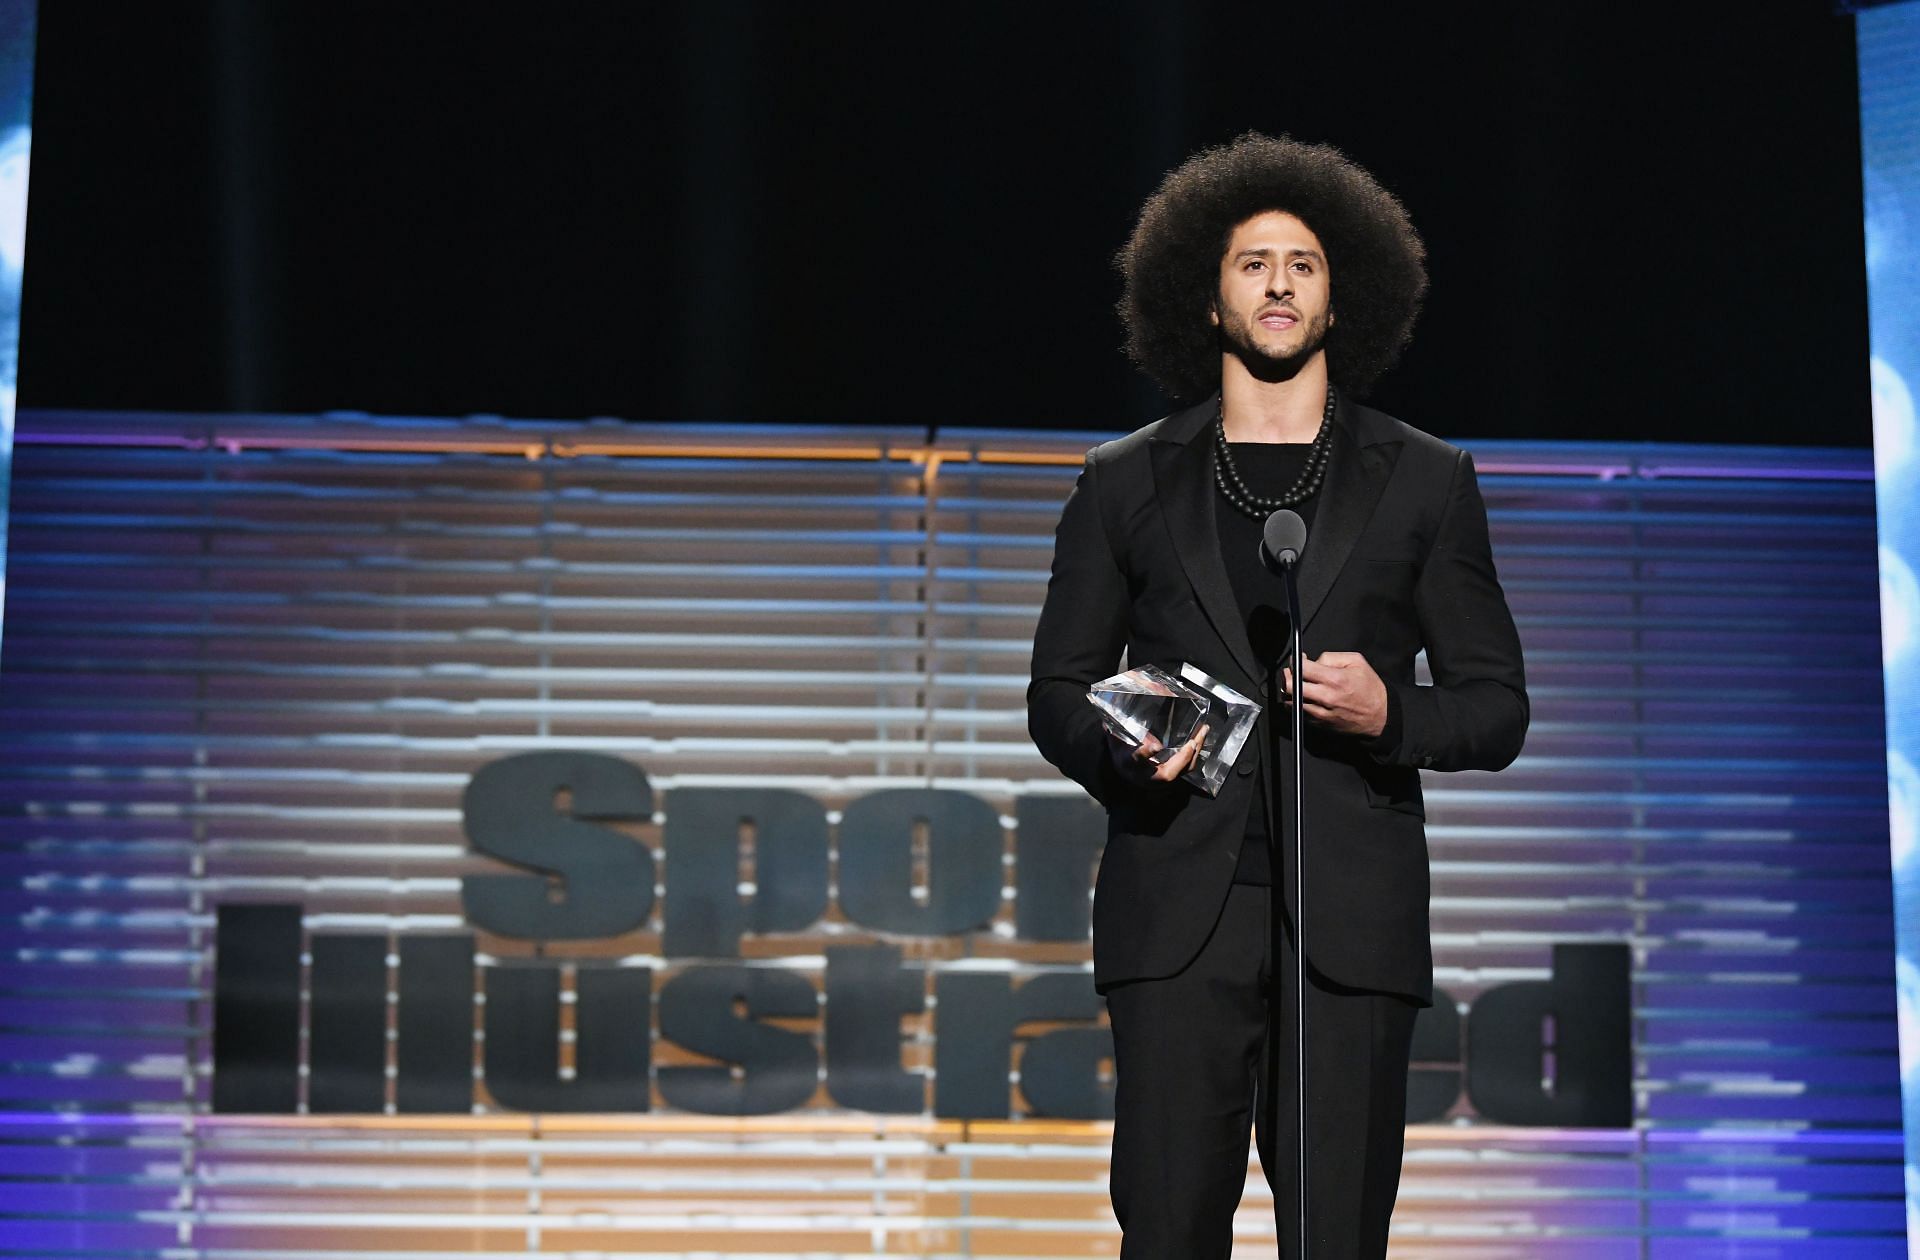 Colin Kaepernick at the SPORTS ILLUSTRATED 2017 Sportsperson of the Year Show